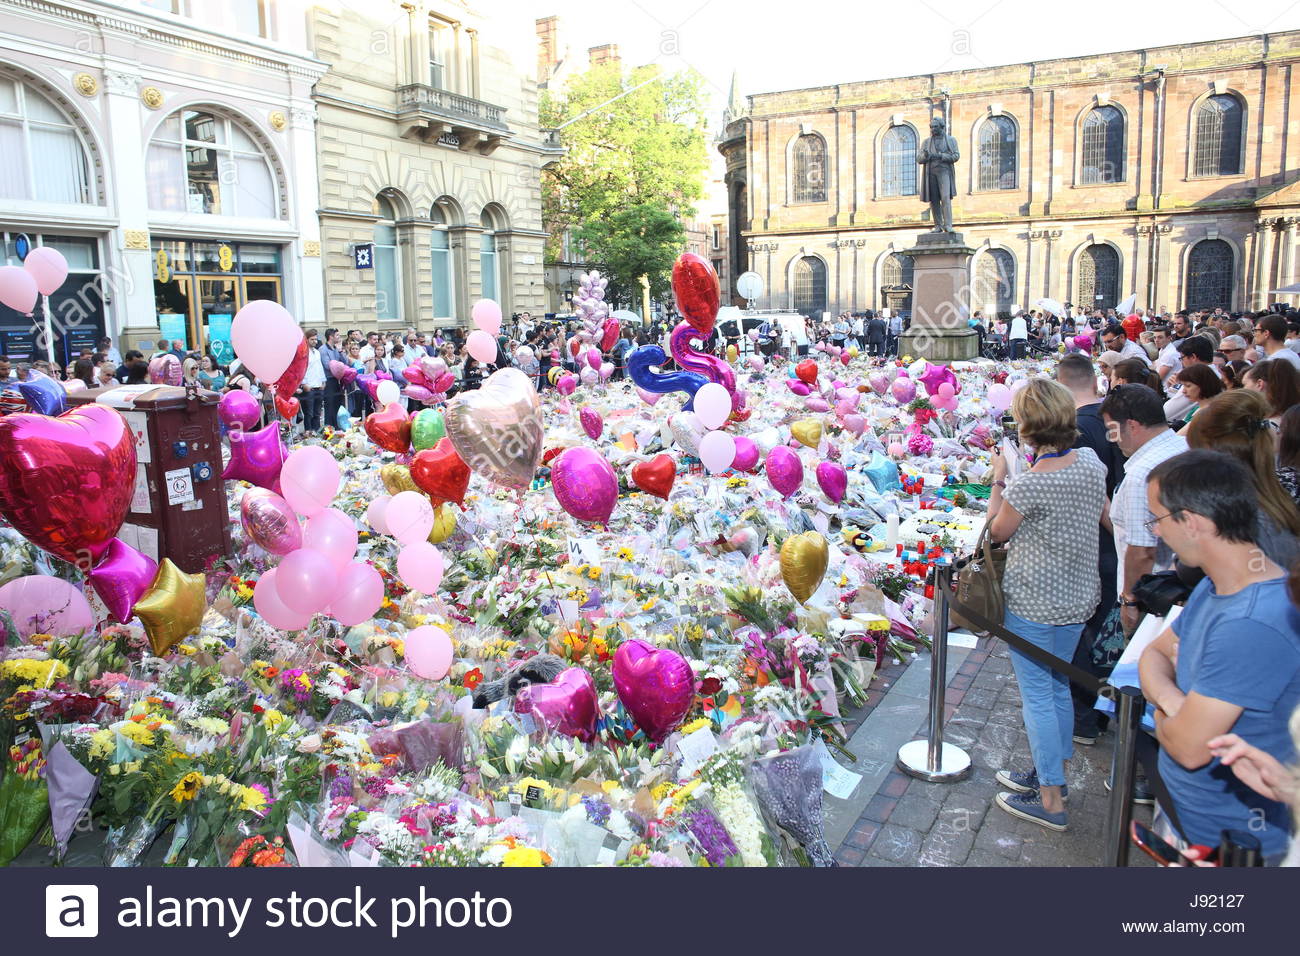 People pay tribute to the victims of the Manchester bombing in St Ann's Square at a memorial of flowers and other objects Credit: reallifephotos/Alamy Stock Photo